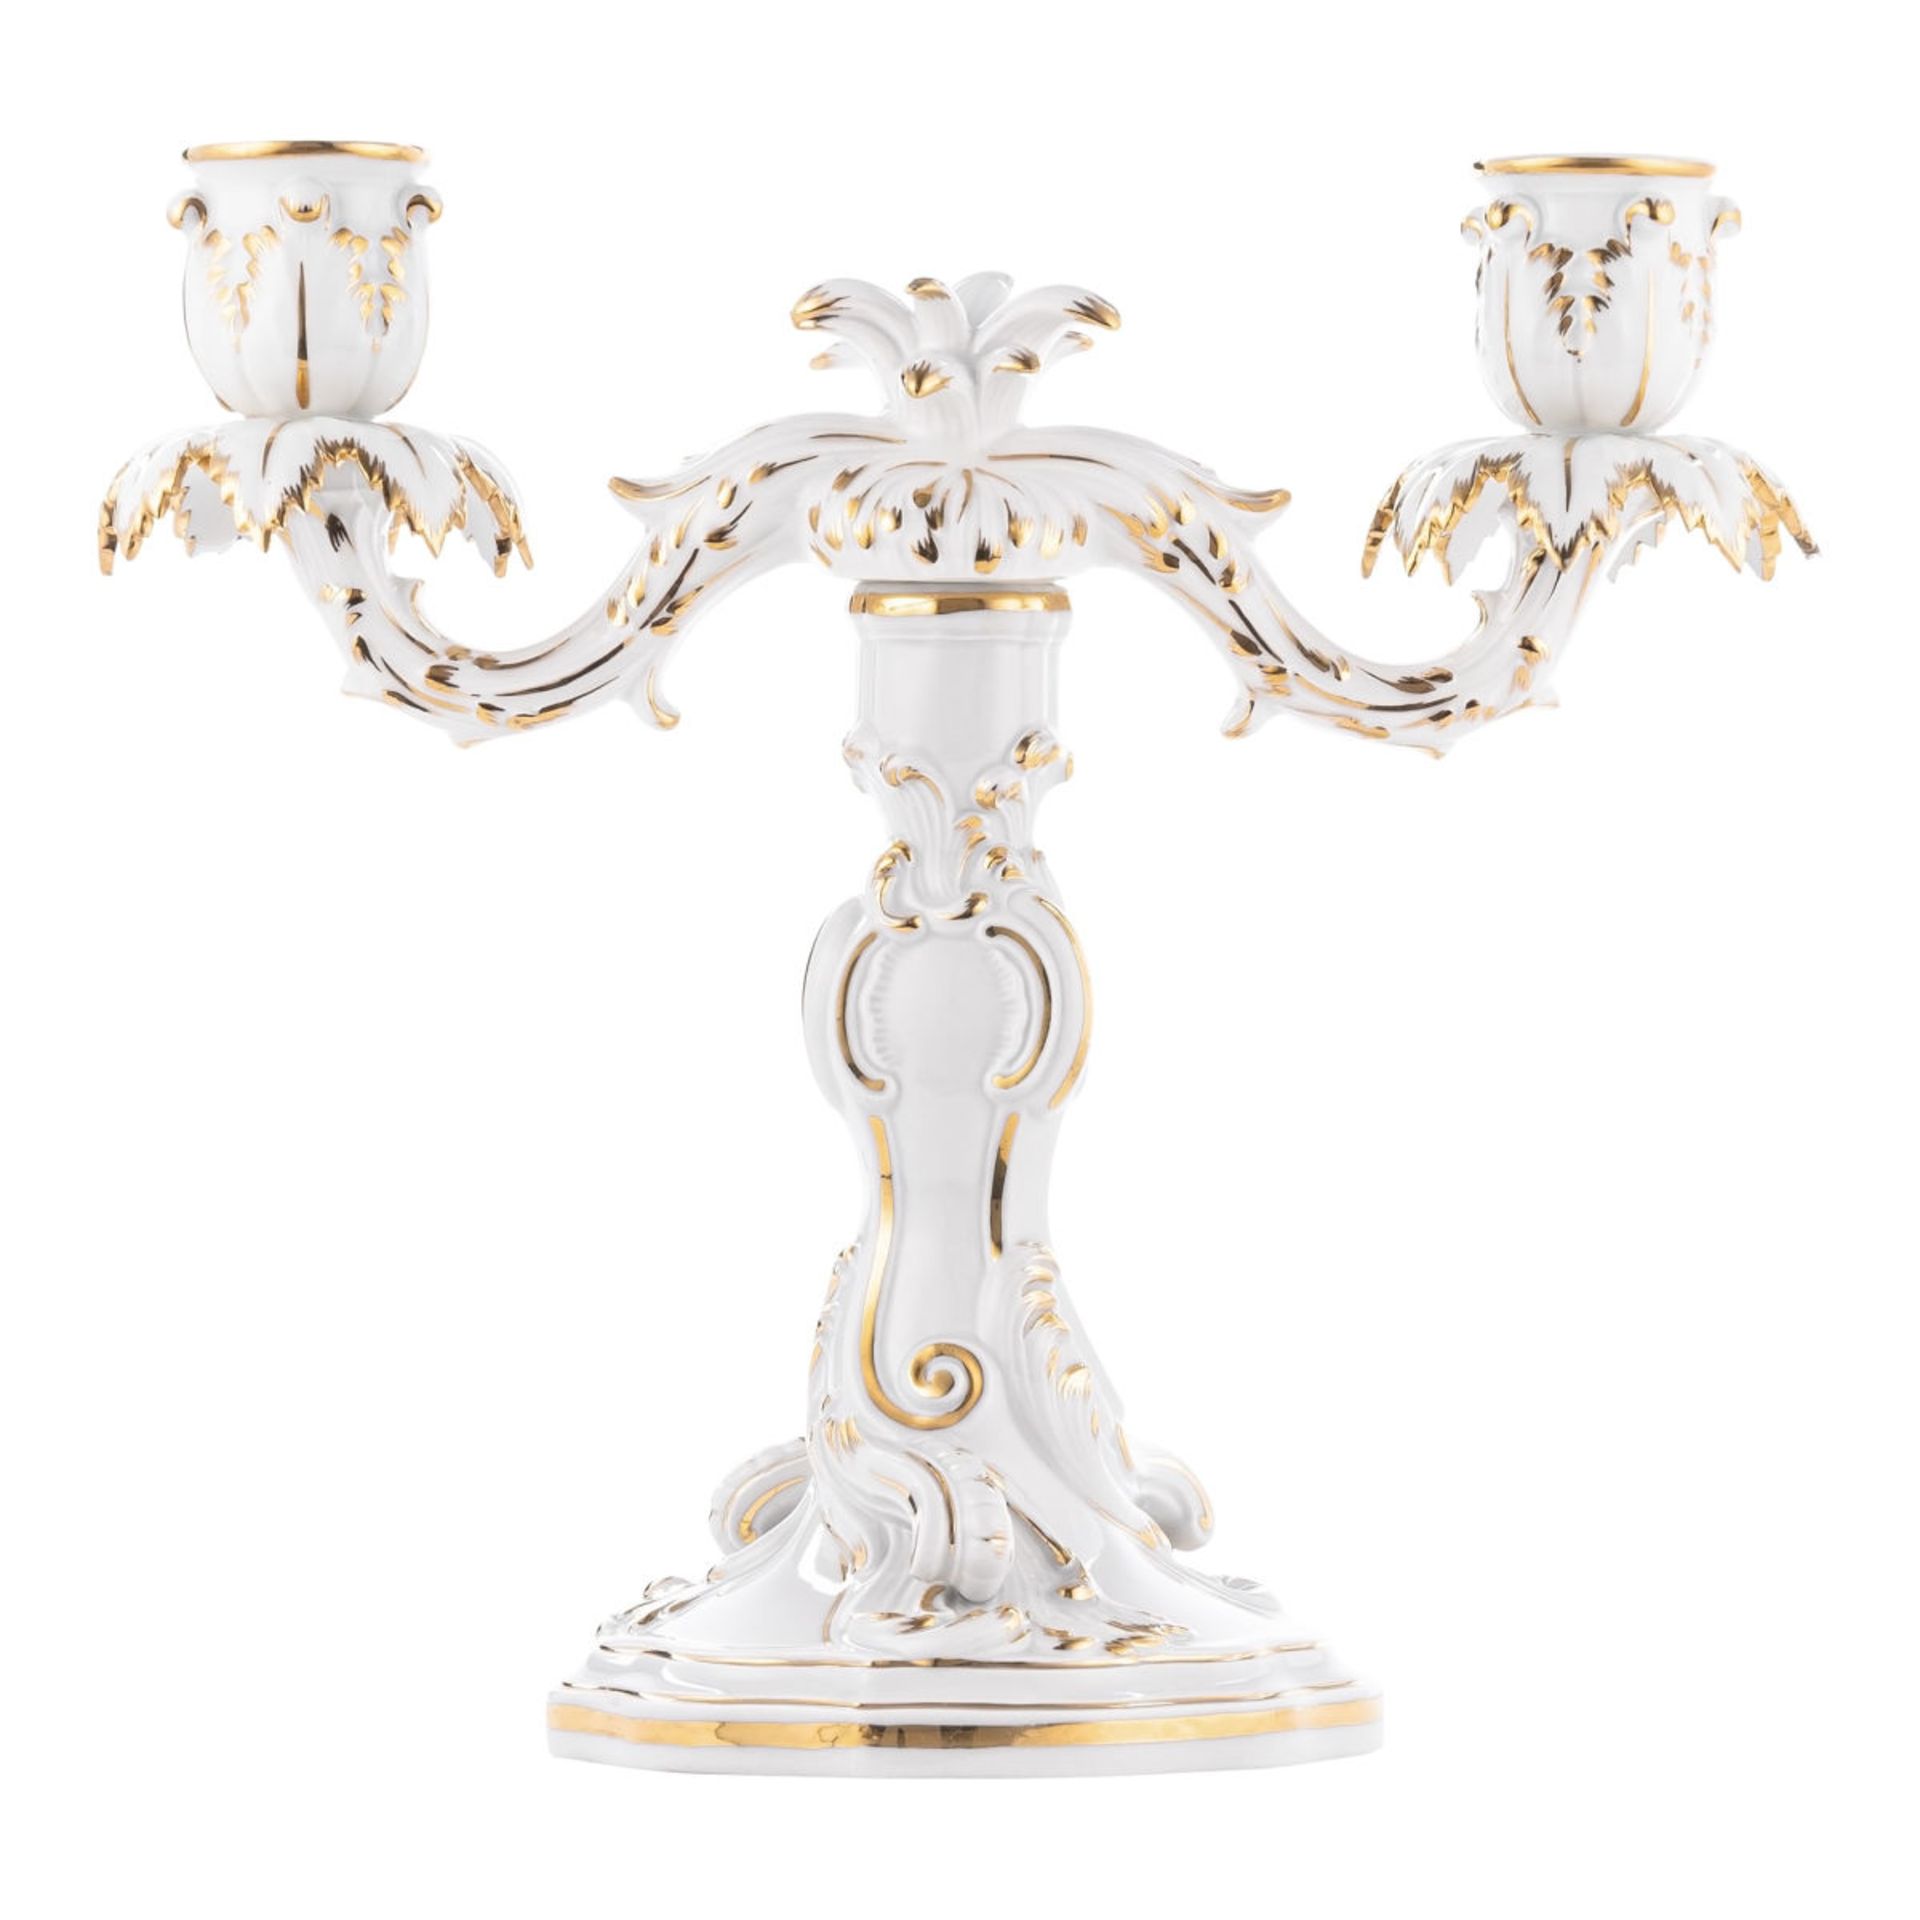 Two-light candlestick in Rococo style 